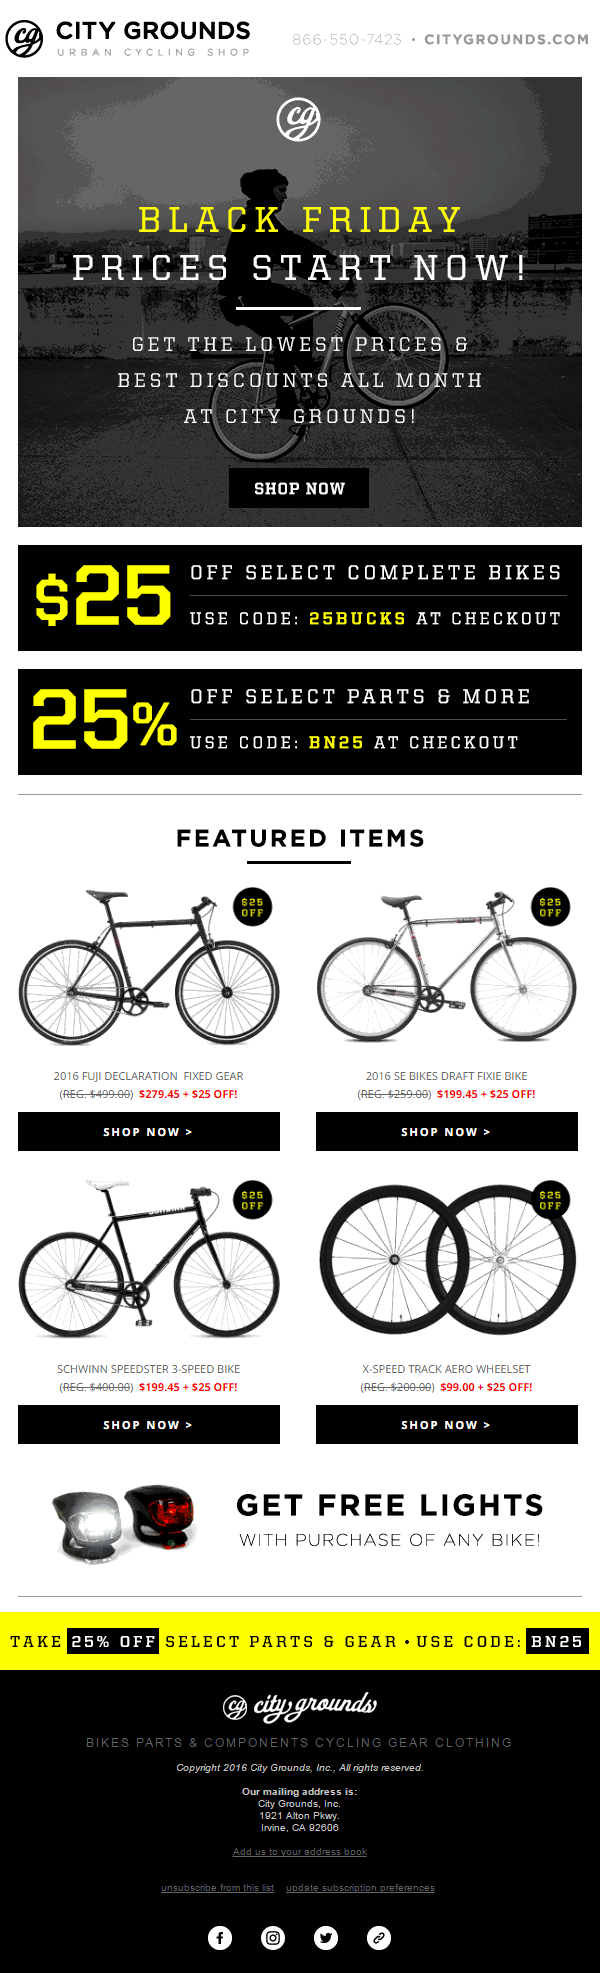 Black Friday Email-City-Grounds